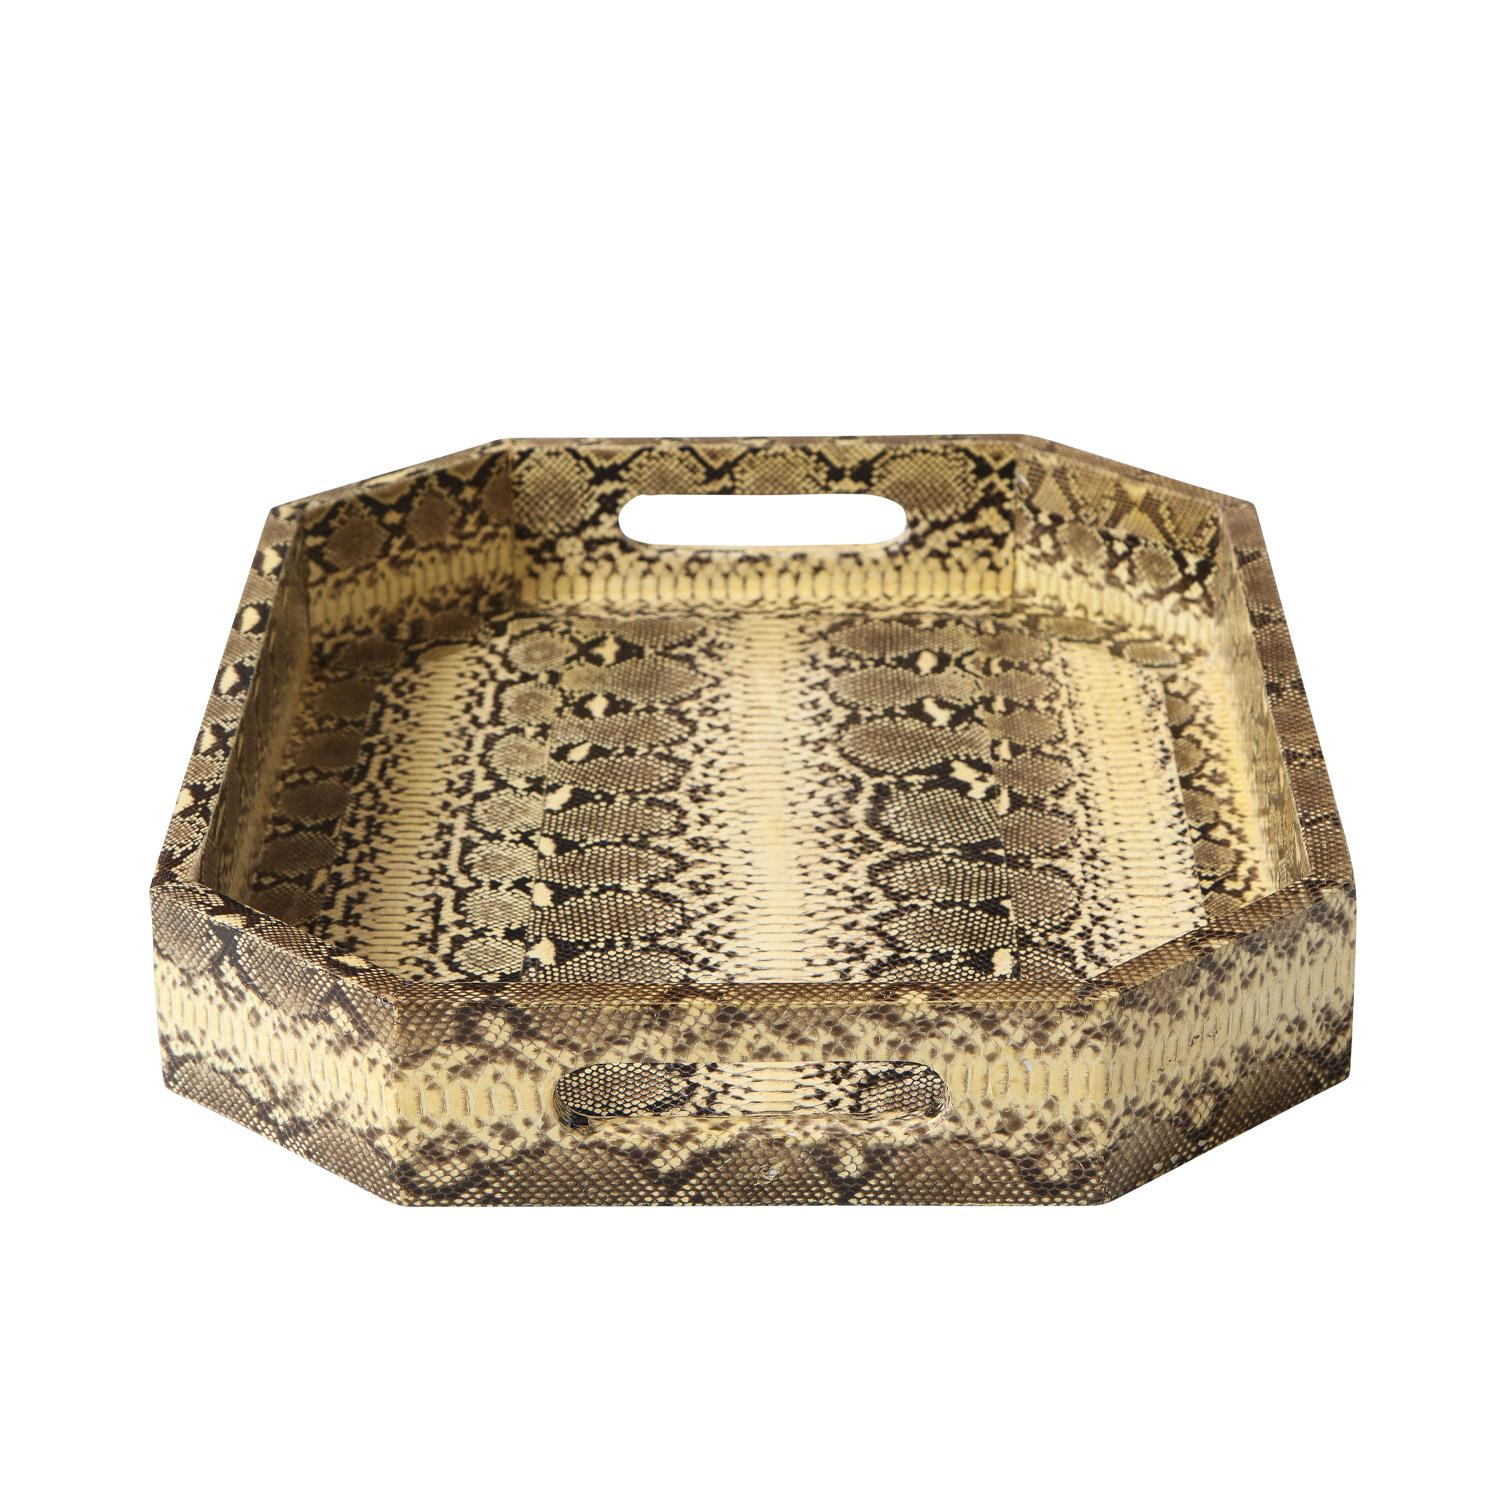 American Lobel Originals Octagonal Tray in Natural Python, New For Sale